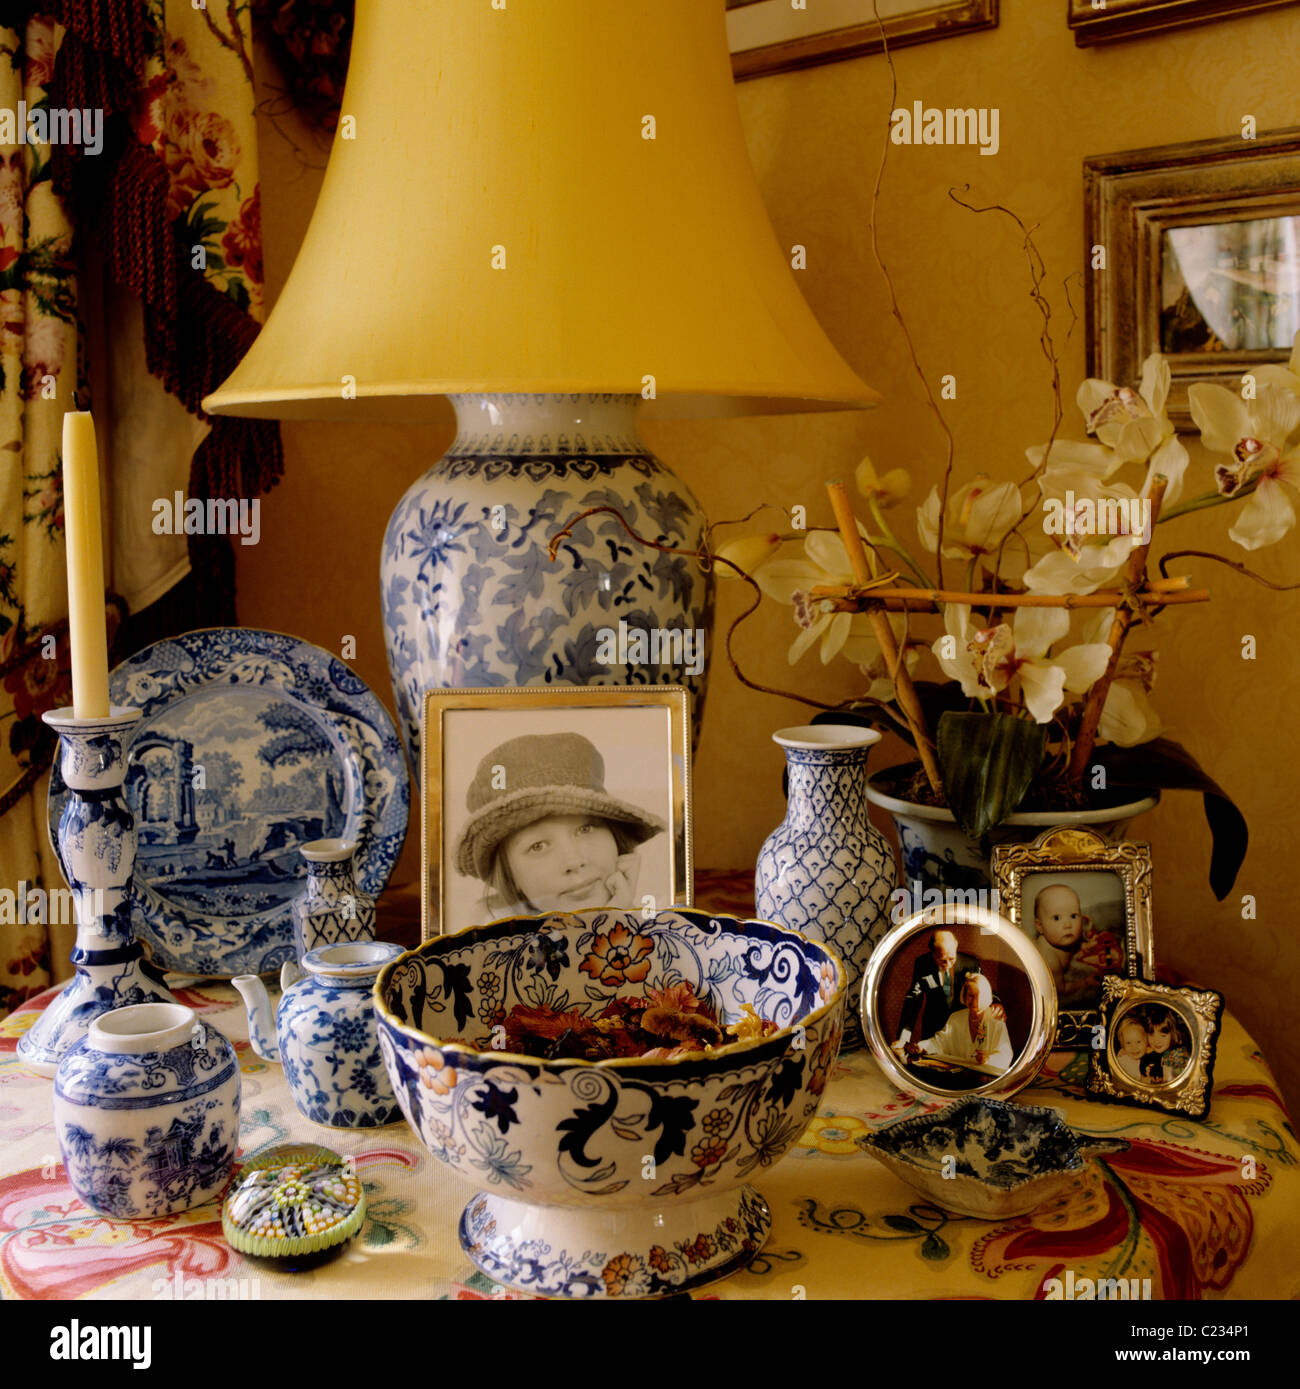 Assorted blue and white chinaware on table with yellow lampshade Stock Photo